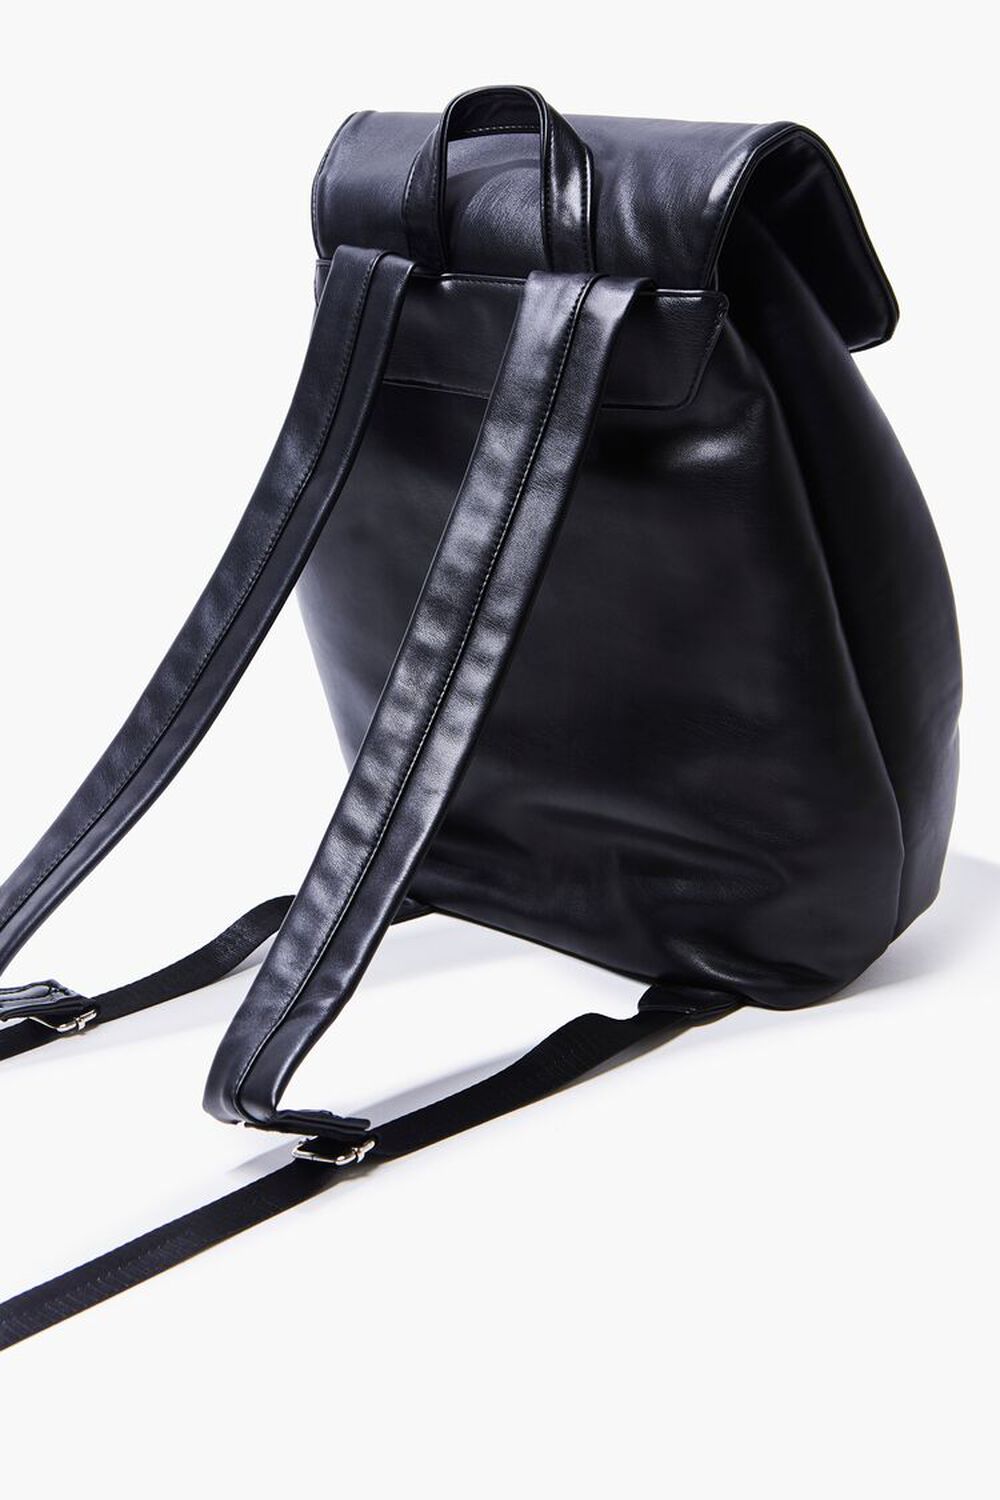 BLACK Faux Leather Backpack, image 2